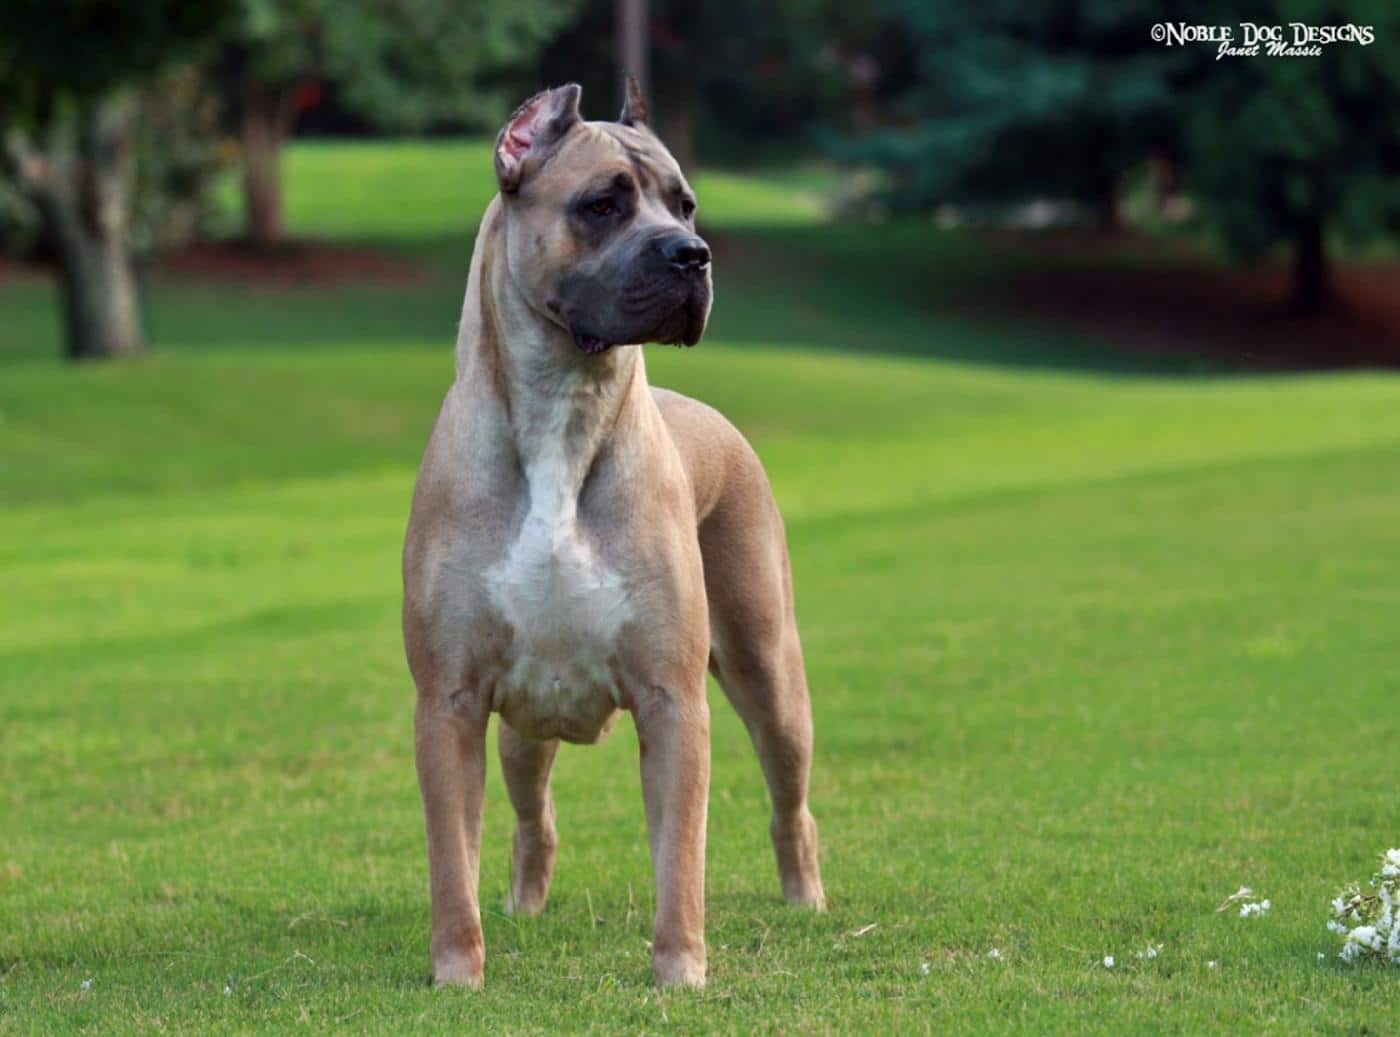 Cane Corso - Muzzle, Forehead, Eyes, Proportion, Movement & Size